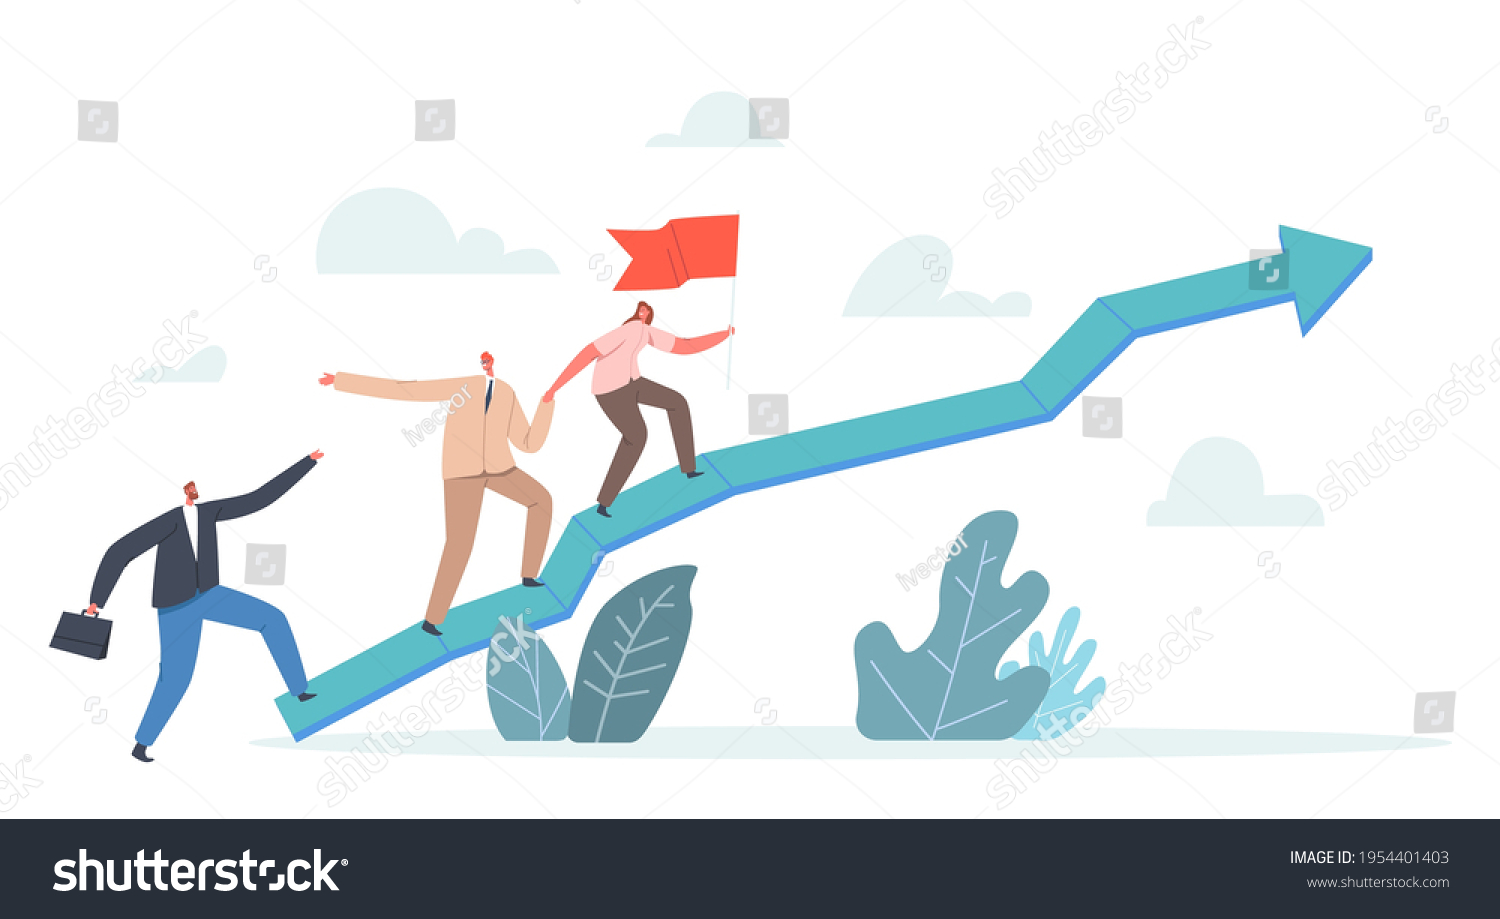 Teamwork and Leadership Concept Business Team Royalty Free Stock